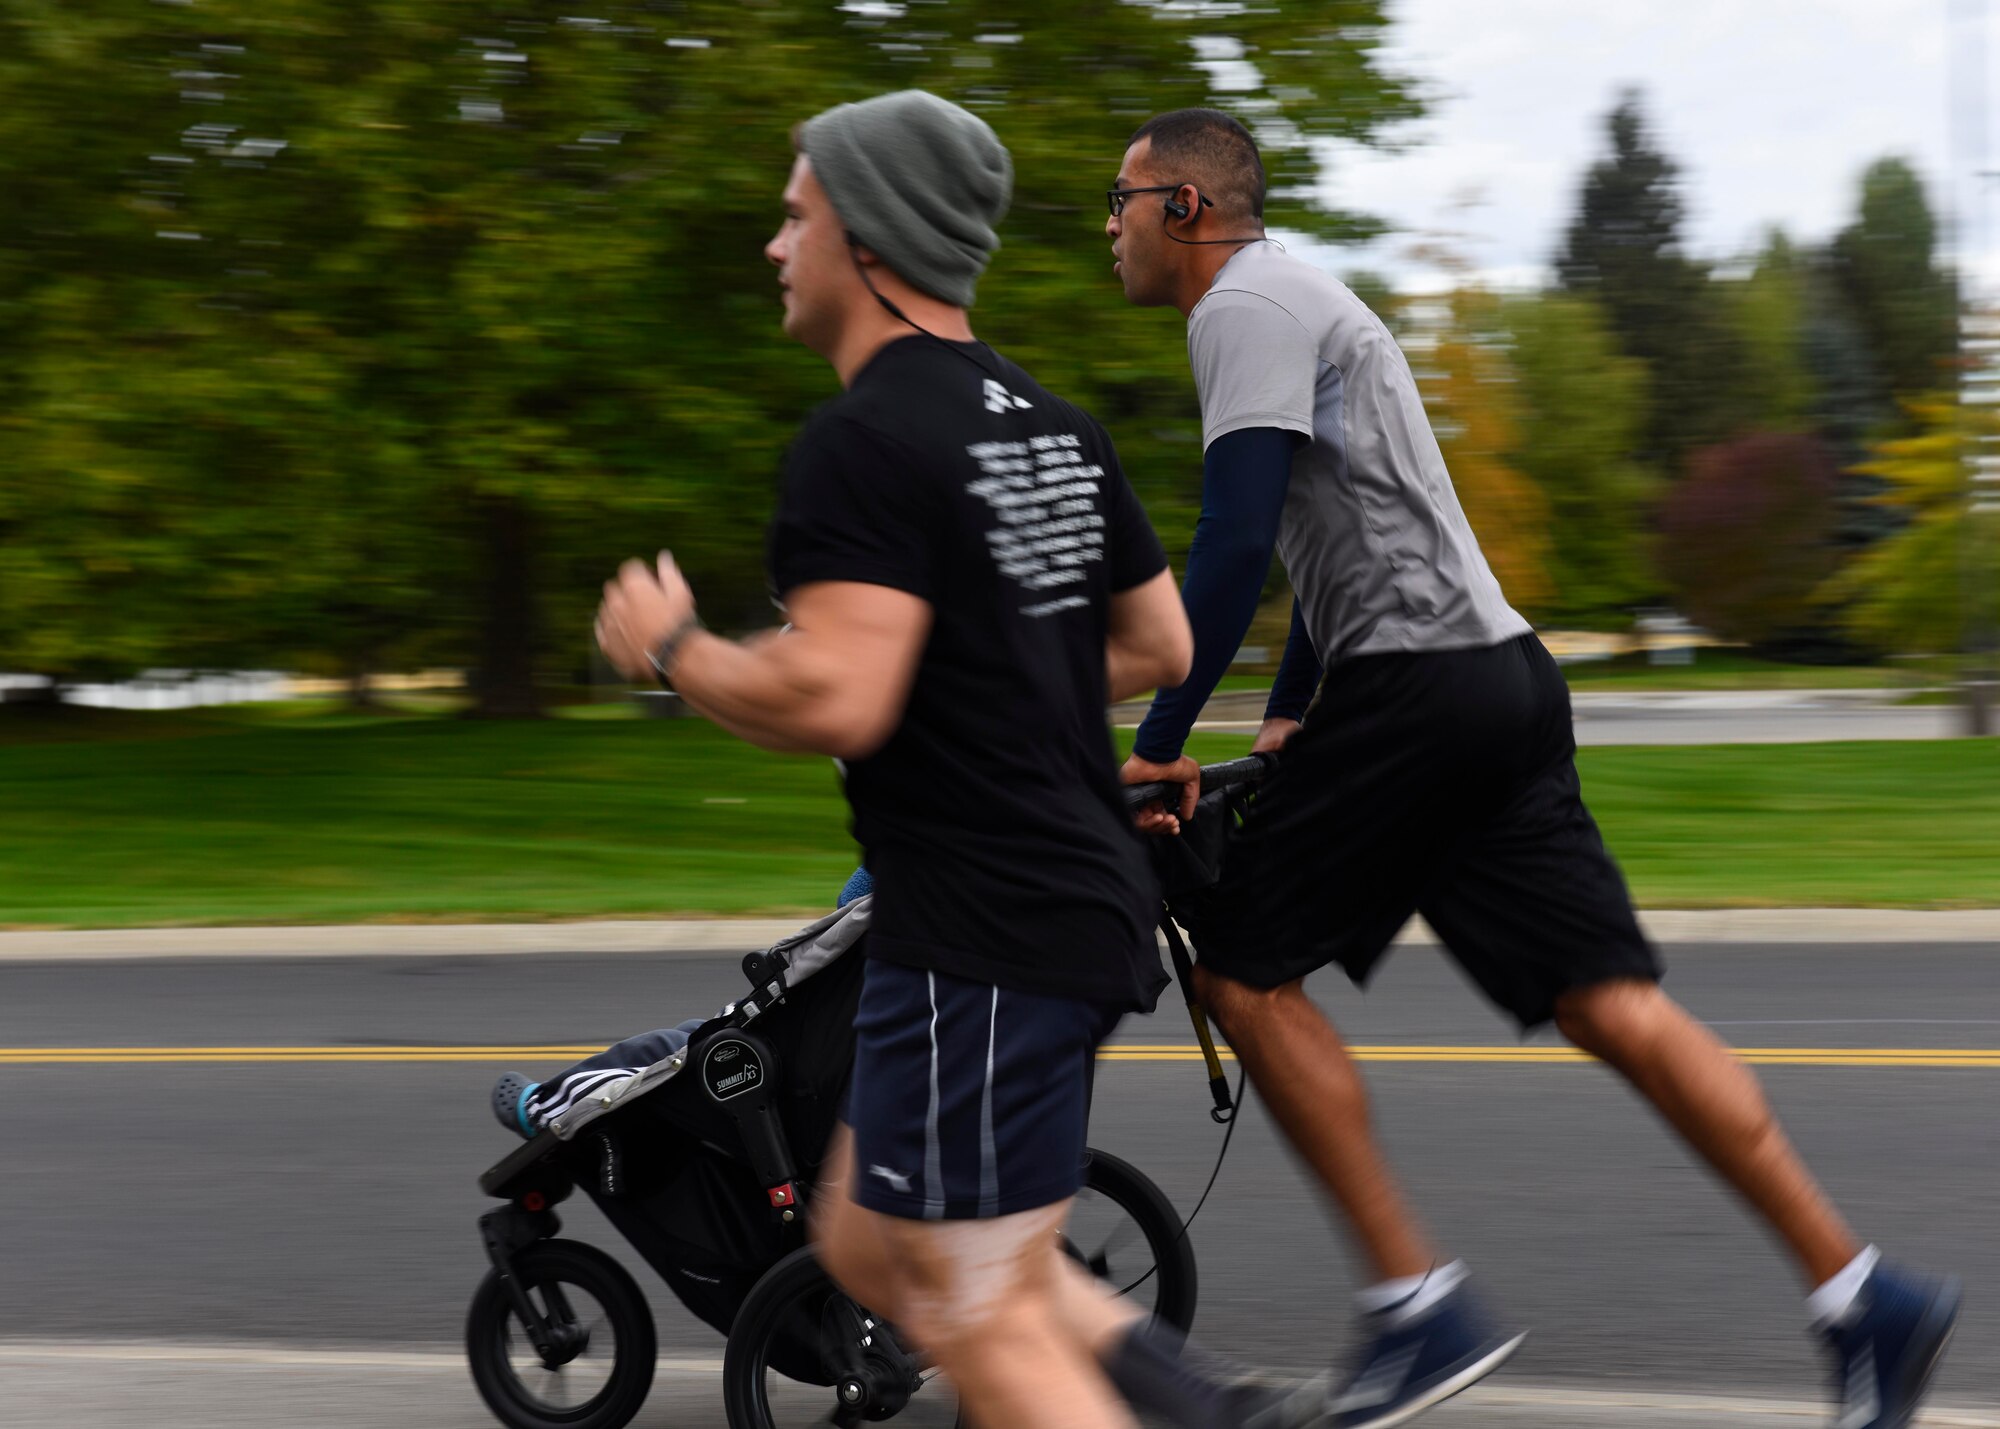 Senior Master Sgt. Jorge Rivera, 92nd Operation Support Squadron air traffic controller, pushes a stroller during the CMSAF Binnicker 9K Memorial Run at Millier Park in Farichild Air Force Base, Washington, Sept. 22, 2018. Participants of the run received a finisher's medallion as well as a commemorative event challenge coin. (U.S. Air Force photo/Airman 1st Class Lawrence Sena)